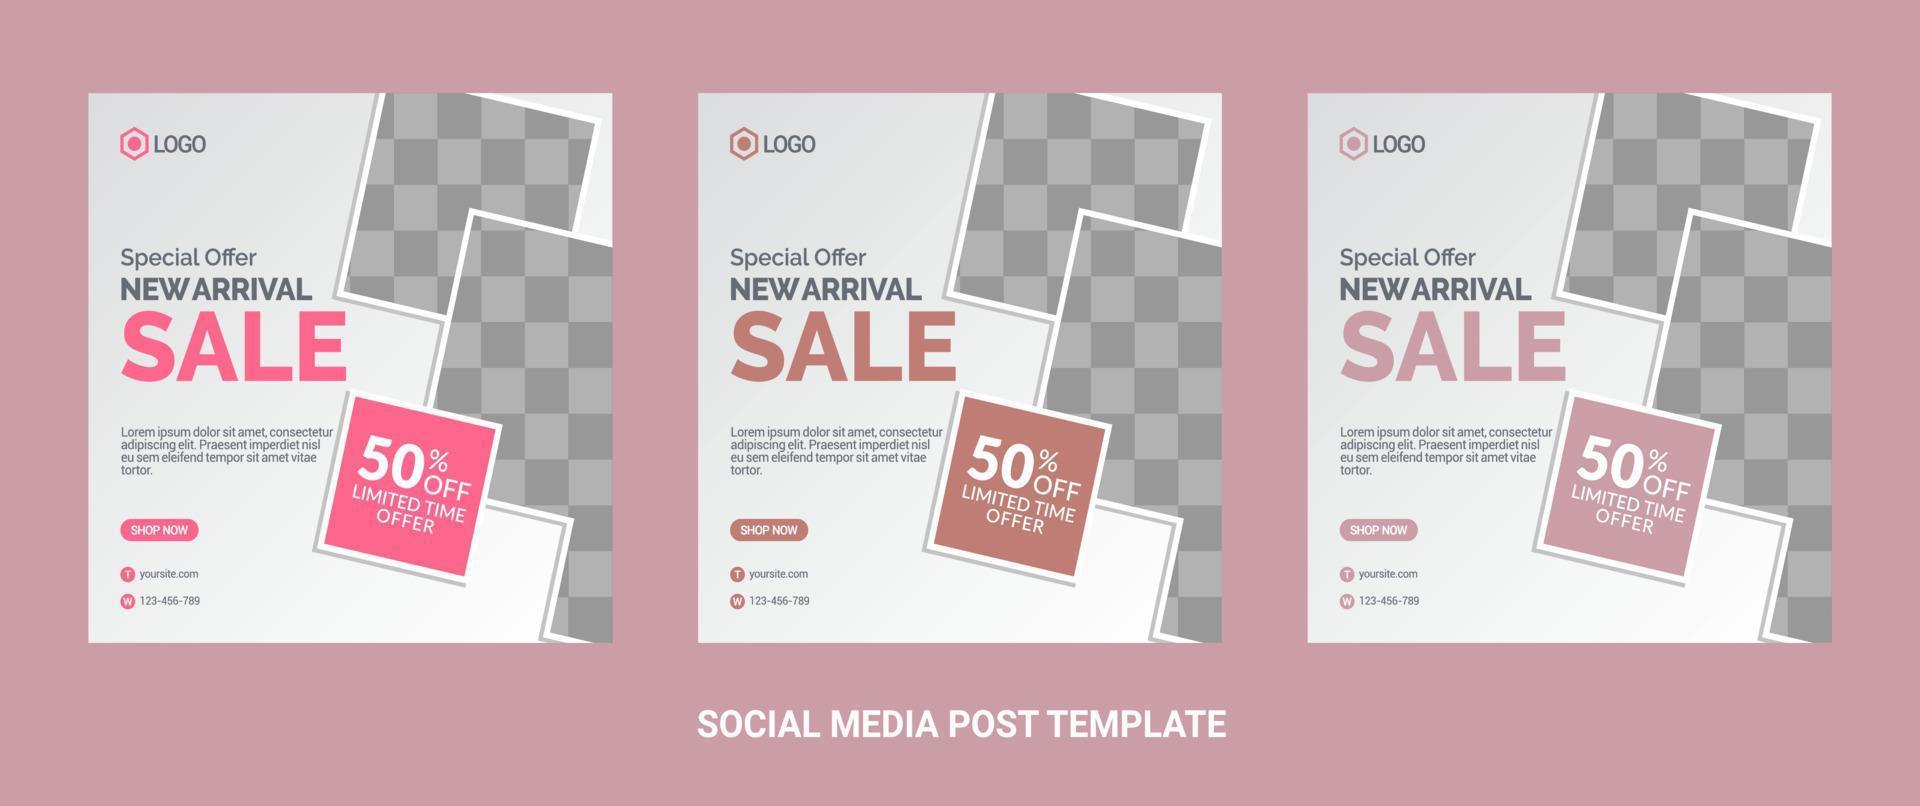 Fashion social media posts template with photo vector